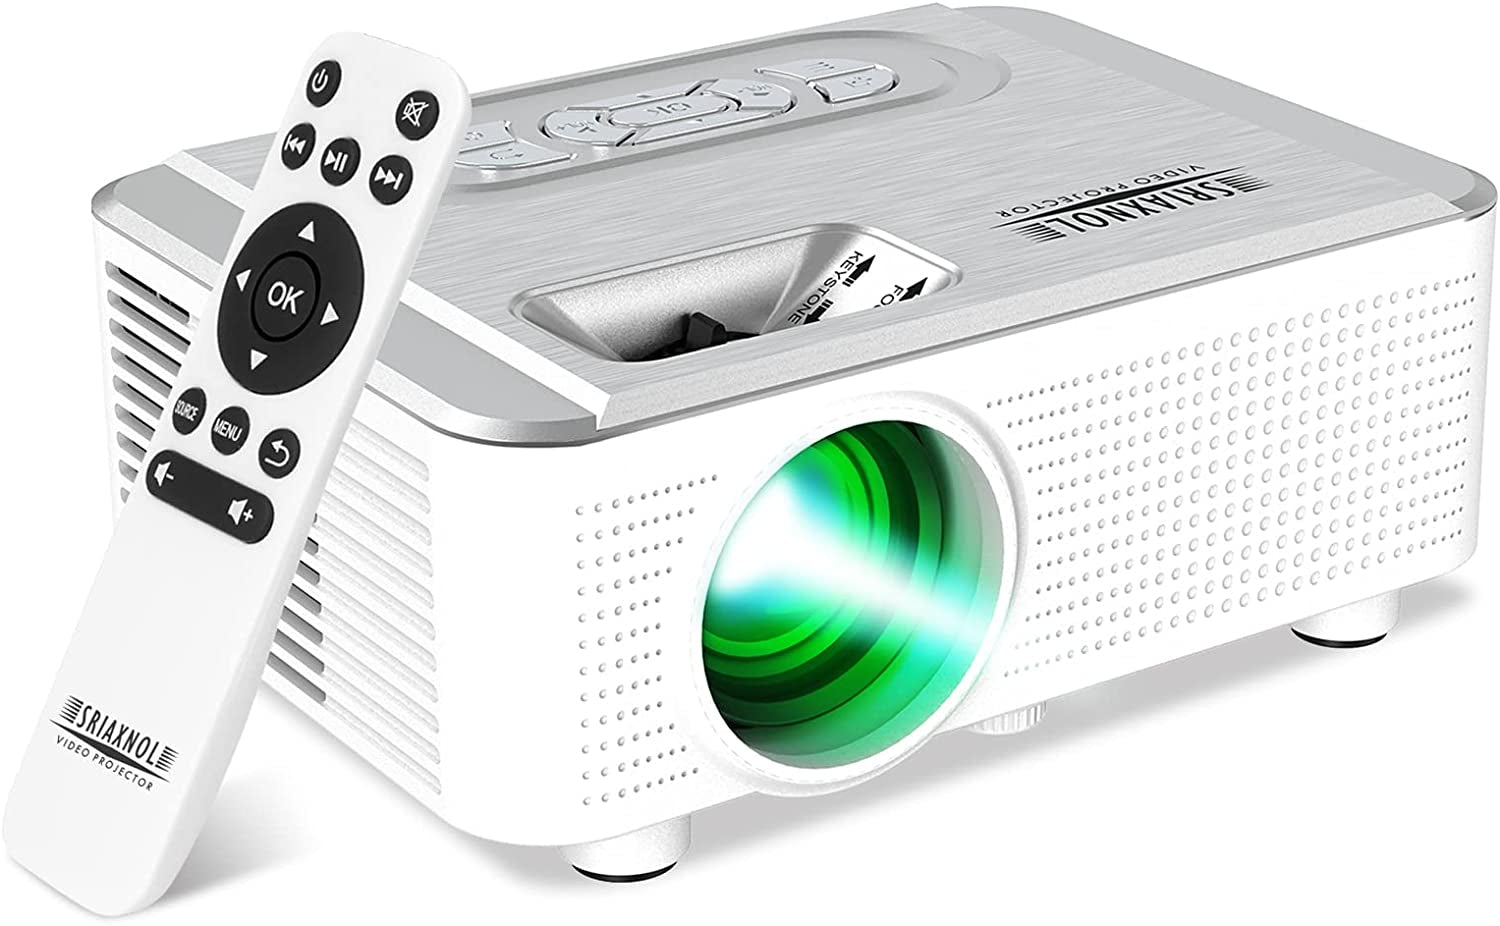 Mini Projector, Portable Movie Projector 8000 Lumens for Home Theater Outdoor Video Projectir 1080P Supported Compatible HDMI,VGA,USB,AV,TF Card,Laptop TV Stick, Xbox Built-in Speaker